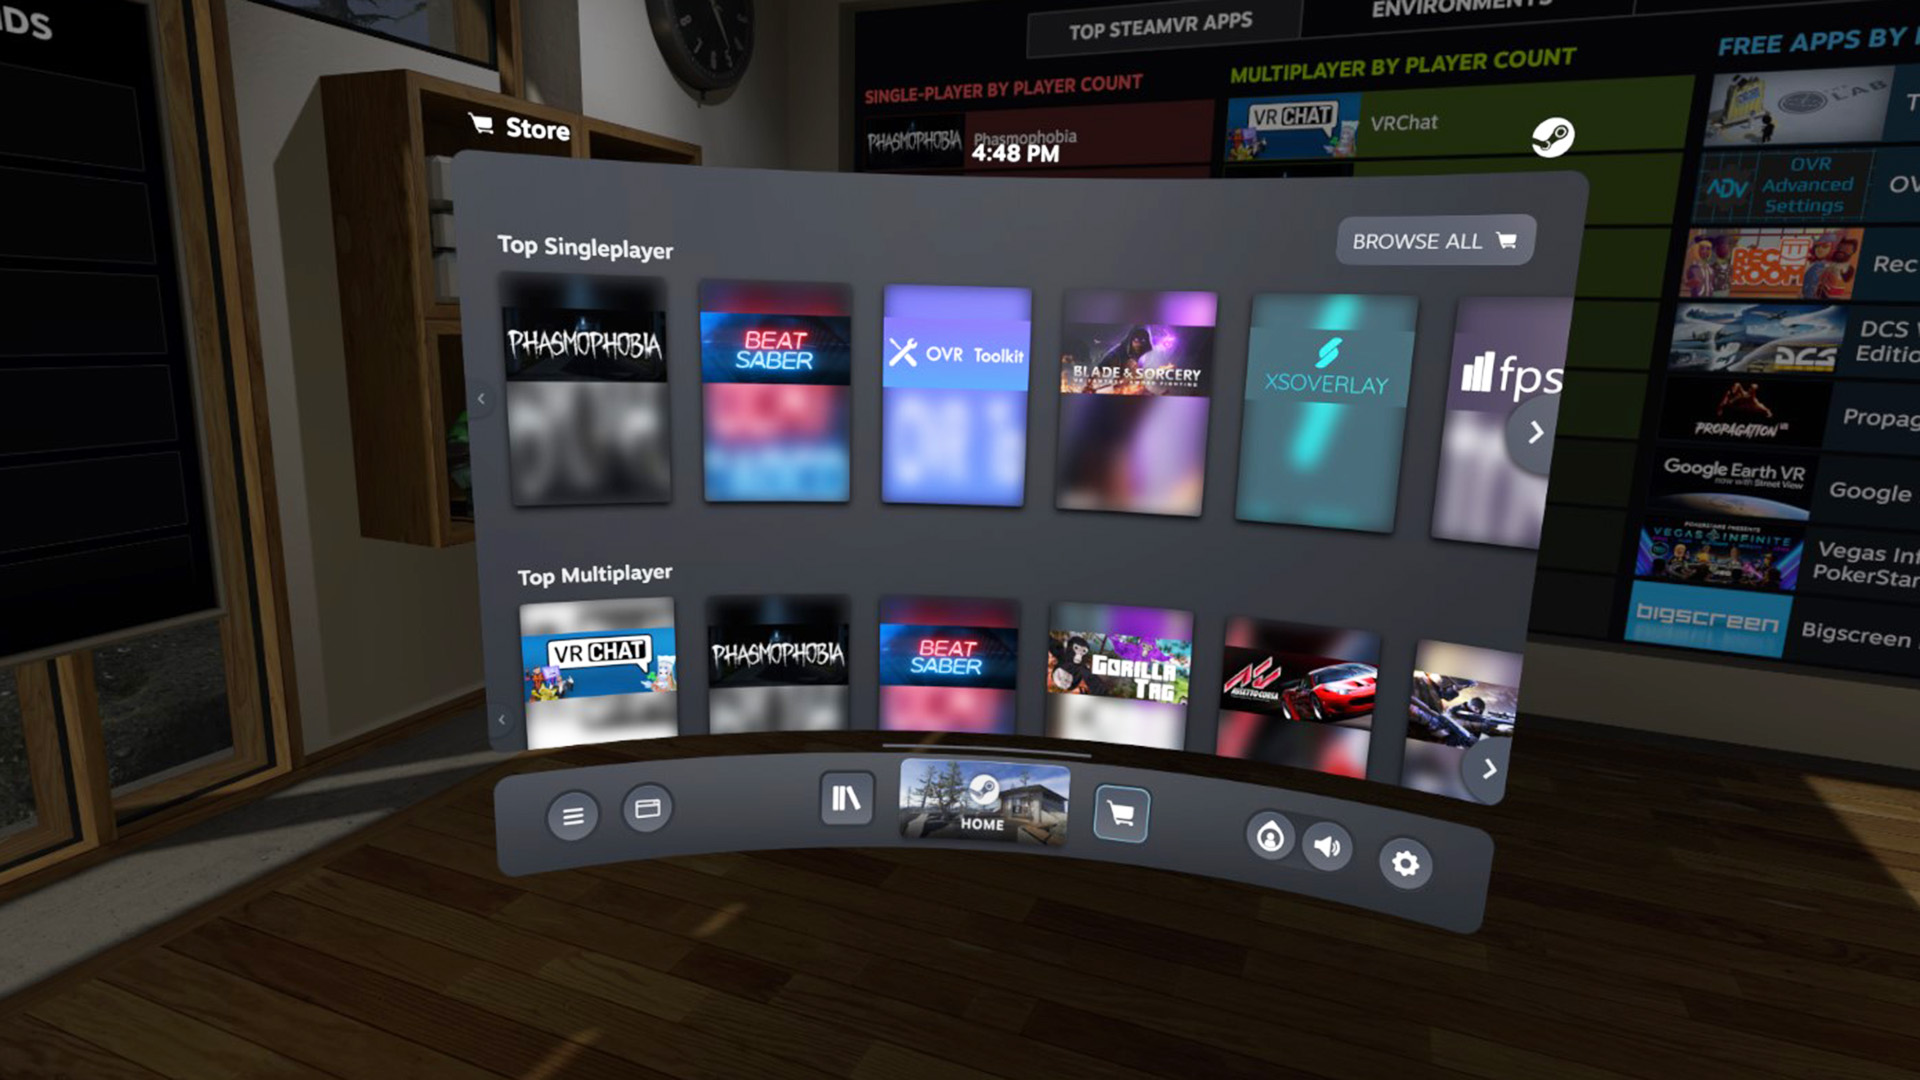 SteamVR's first generation interface on the Quest 2 VR headset.